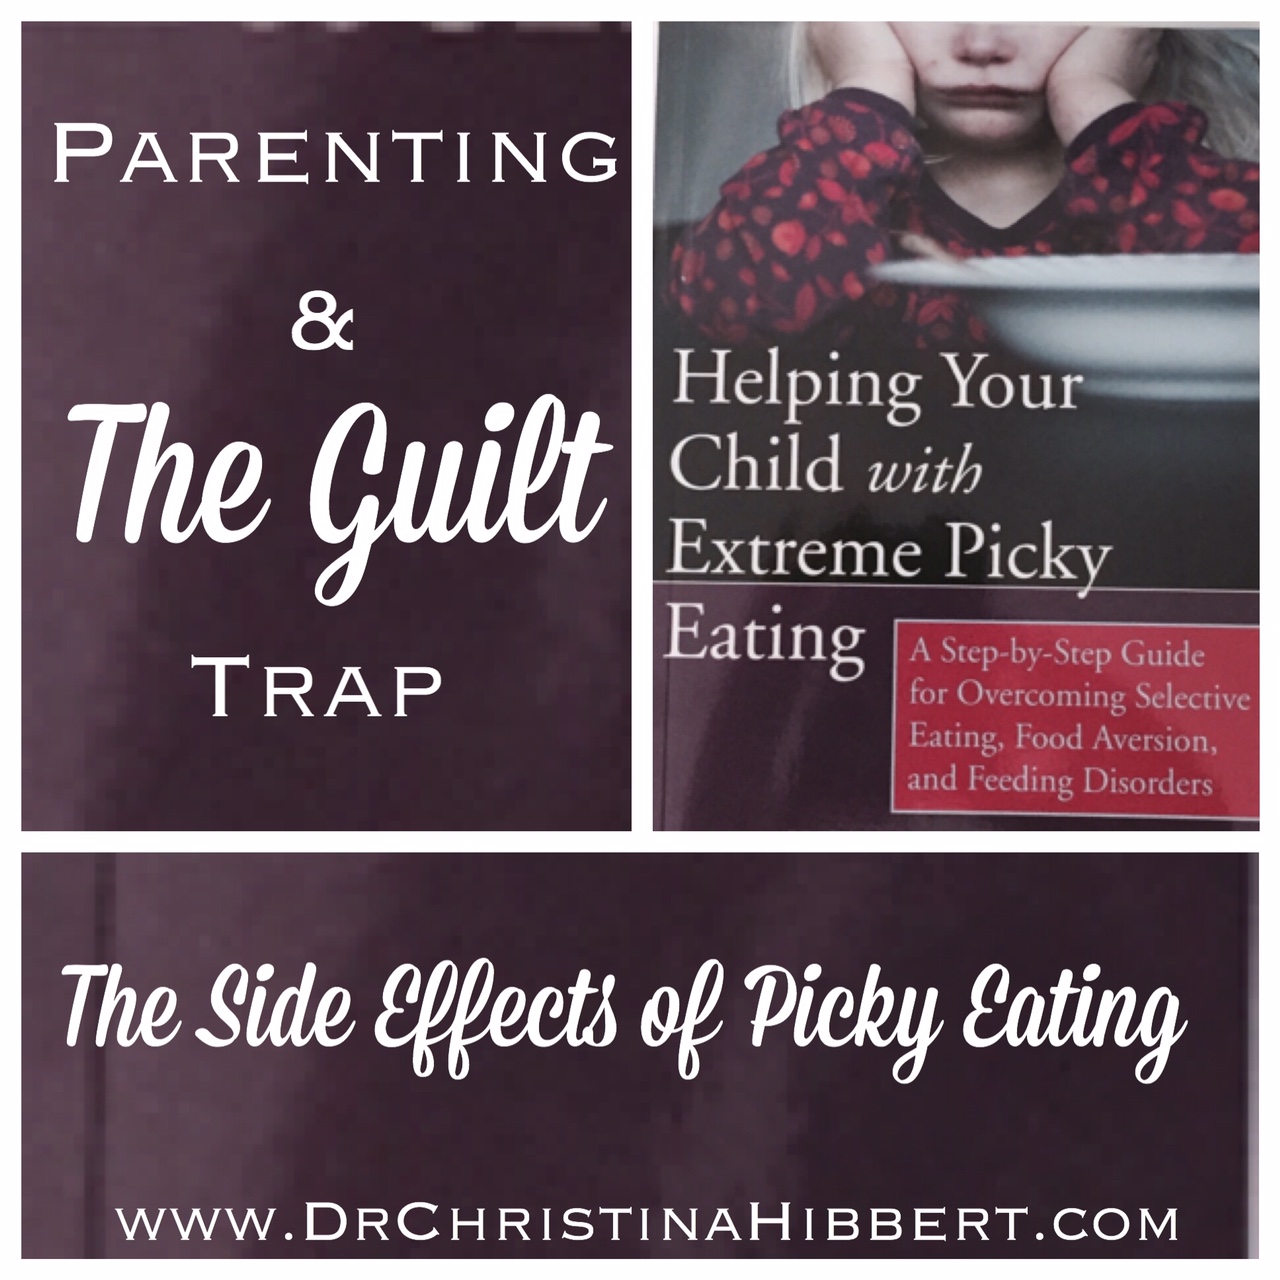 Parenting & The Guilt Trap: The Side-Effects of Picky Eating